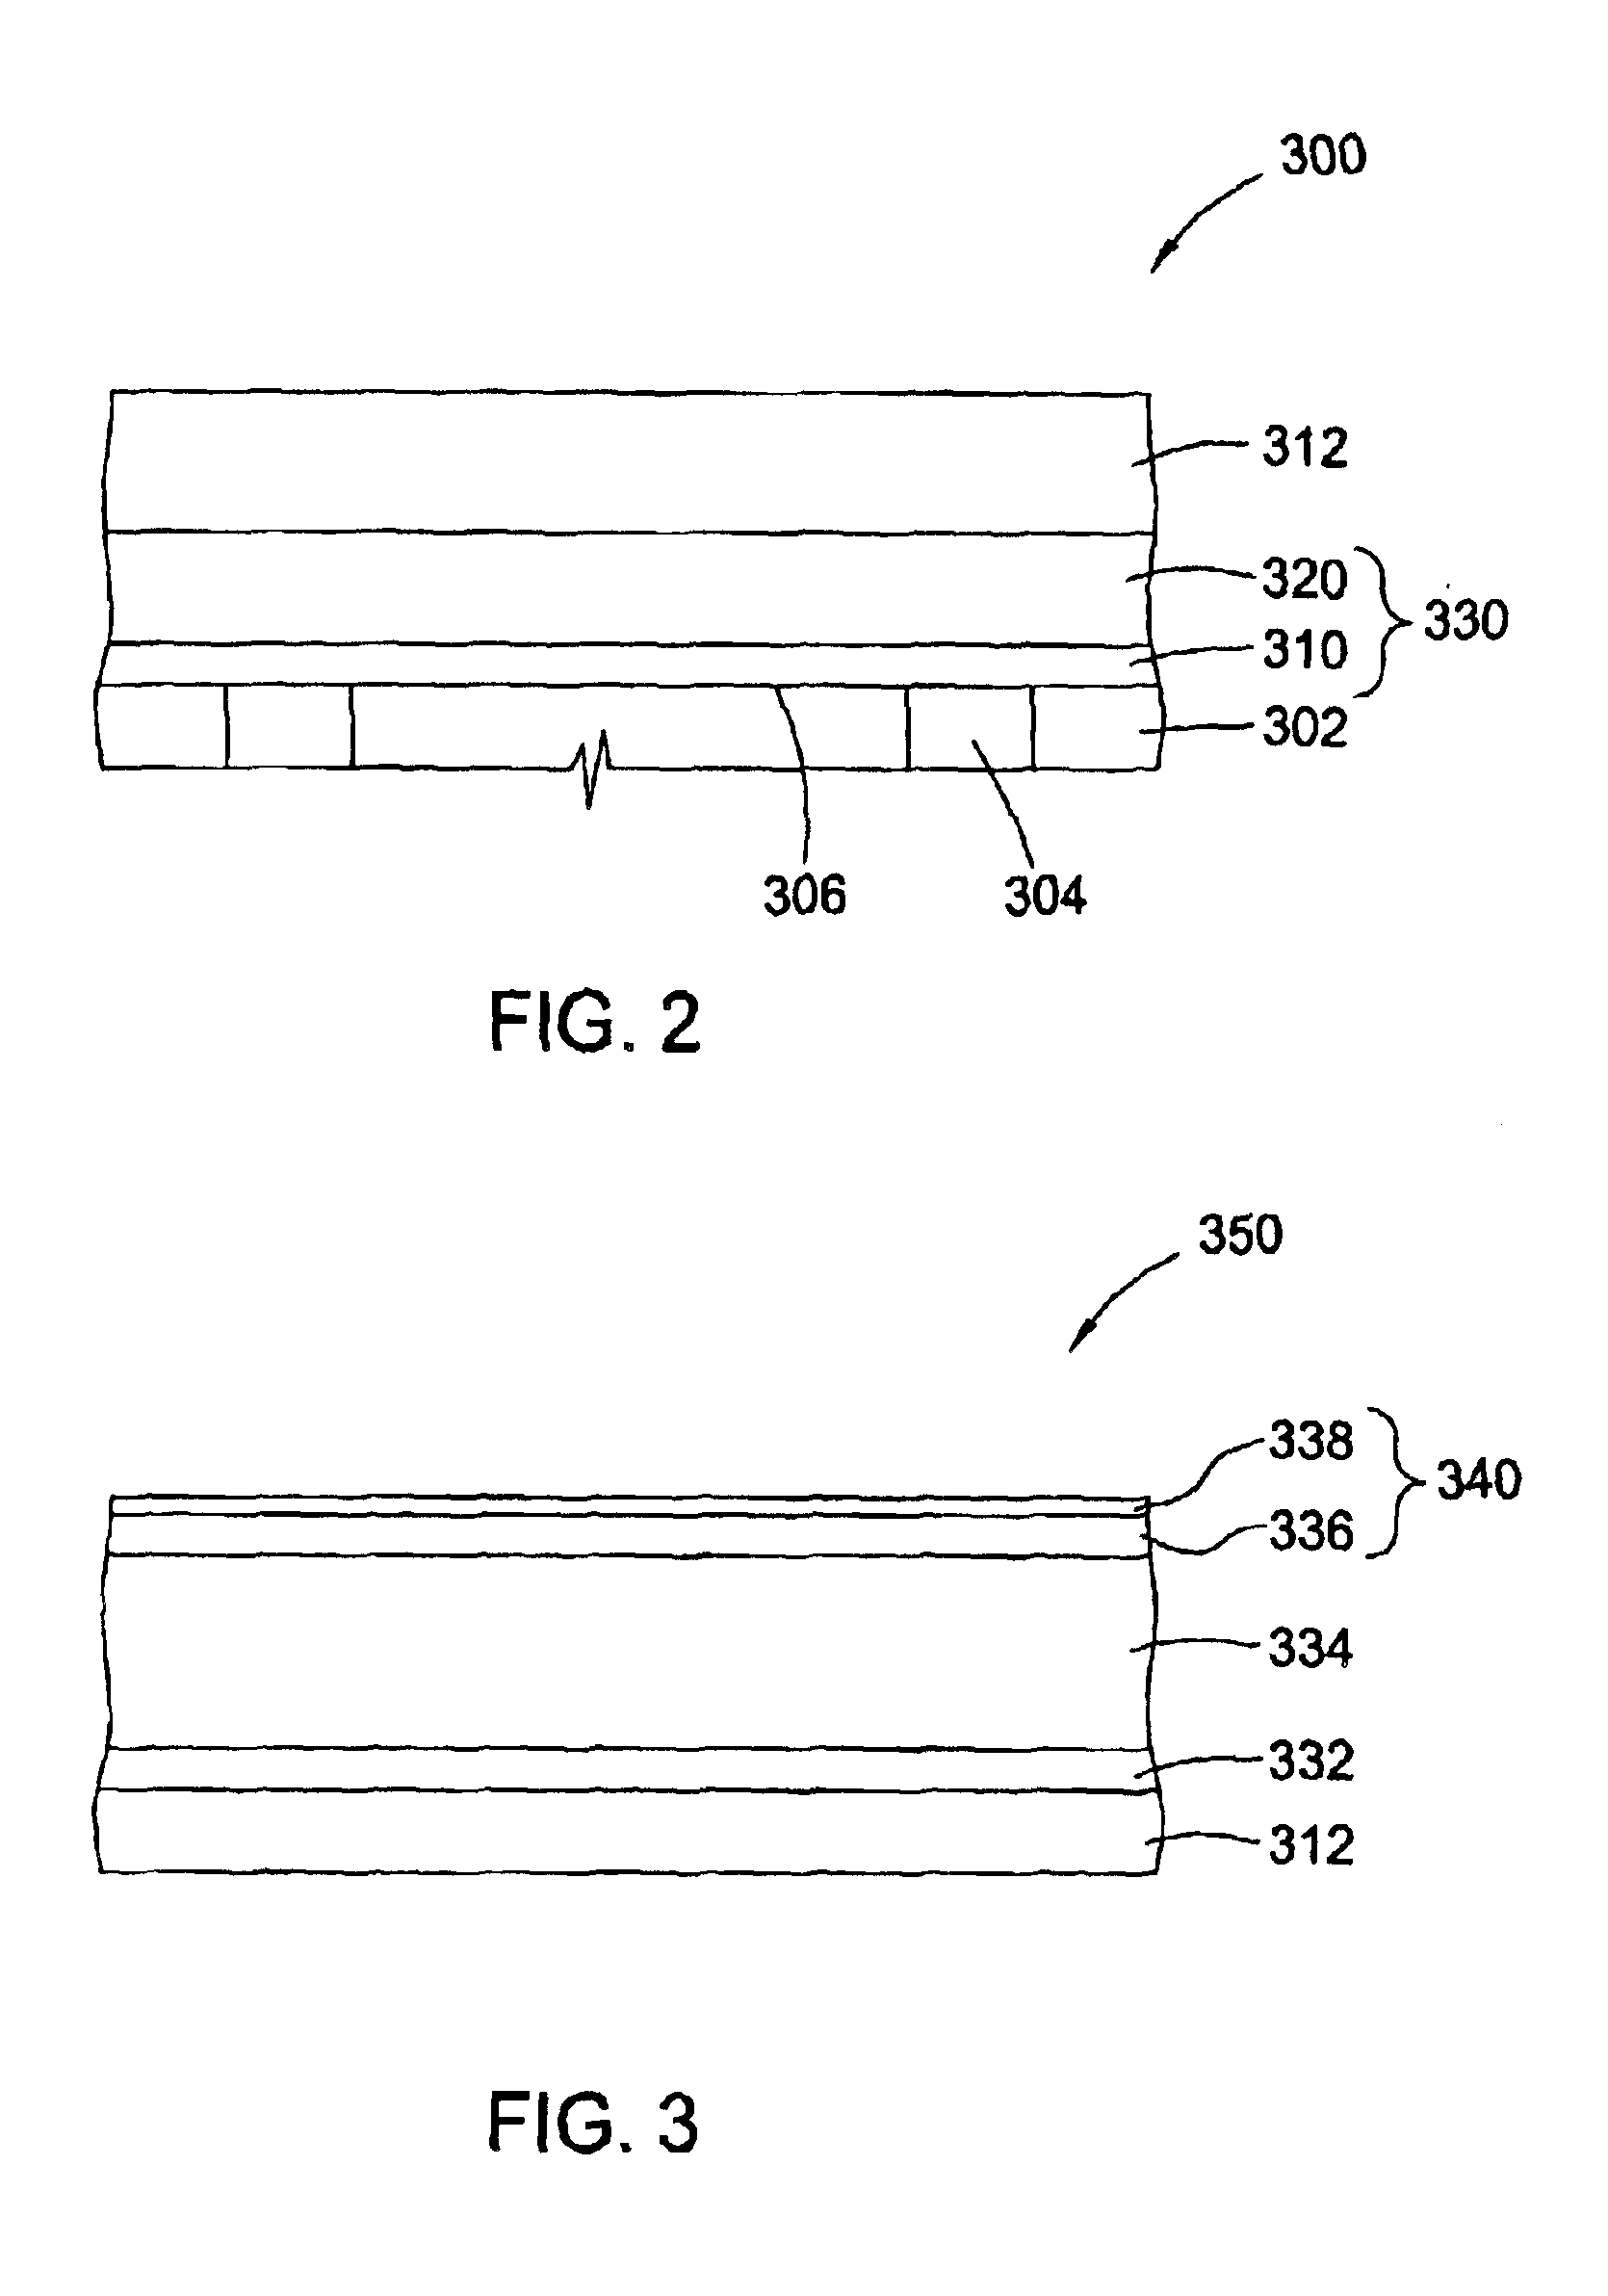 Method for producing semiconductor including forming a layer containing at least silicon carbide and forming a second layer containing at least silicon oxygen carbide